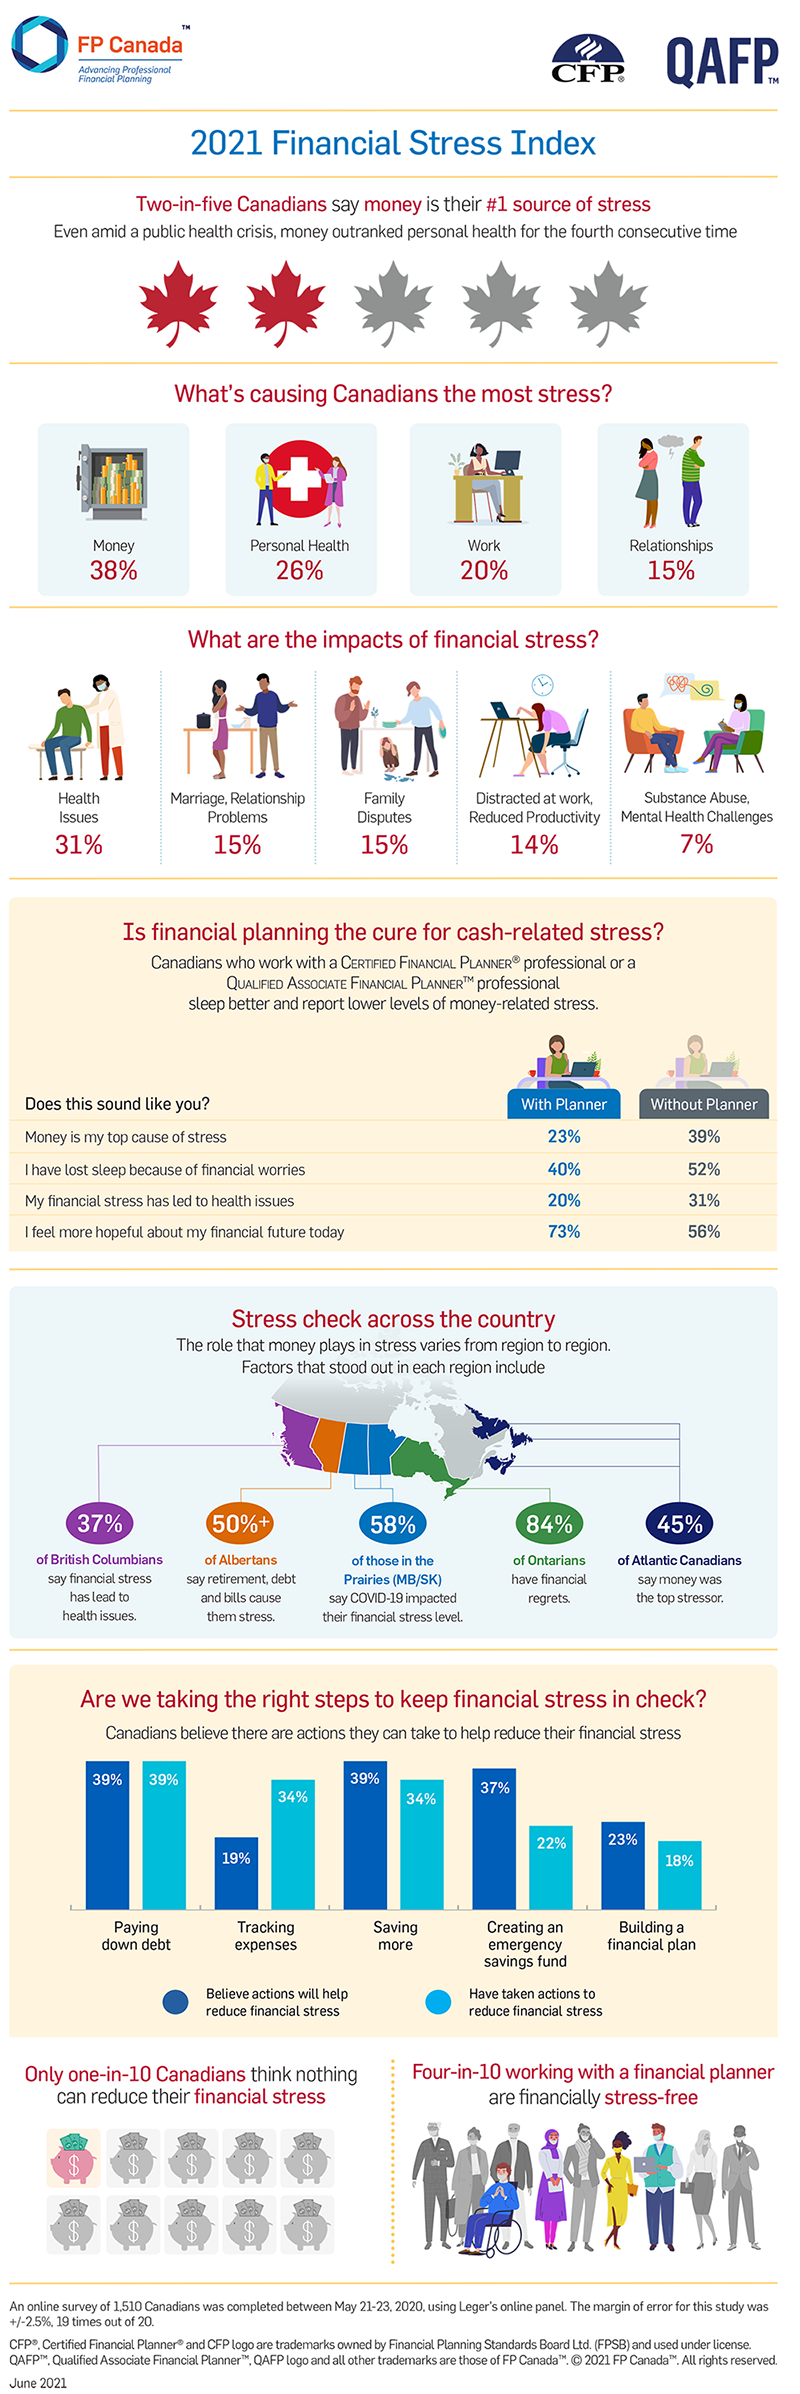 2021 Financial Stress Index Infographic click button to download pdf.